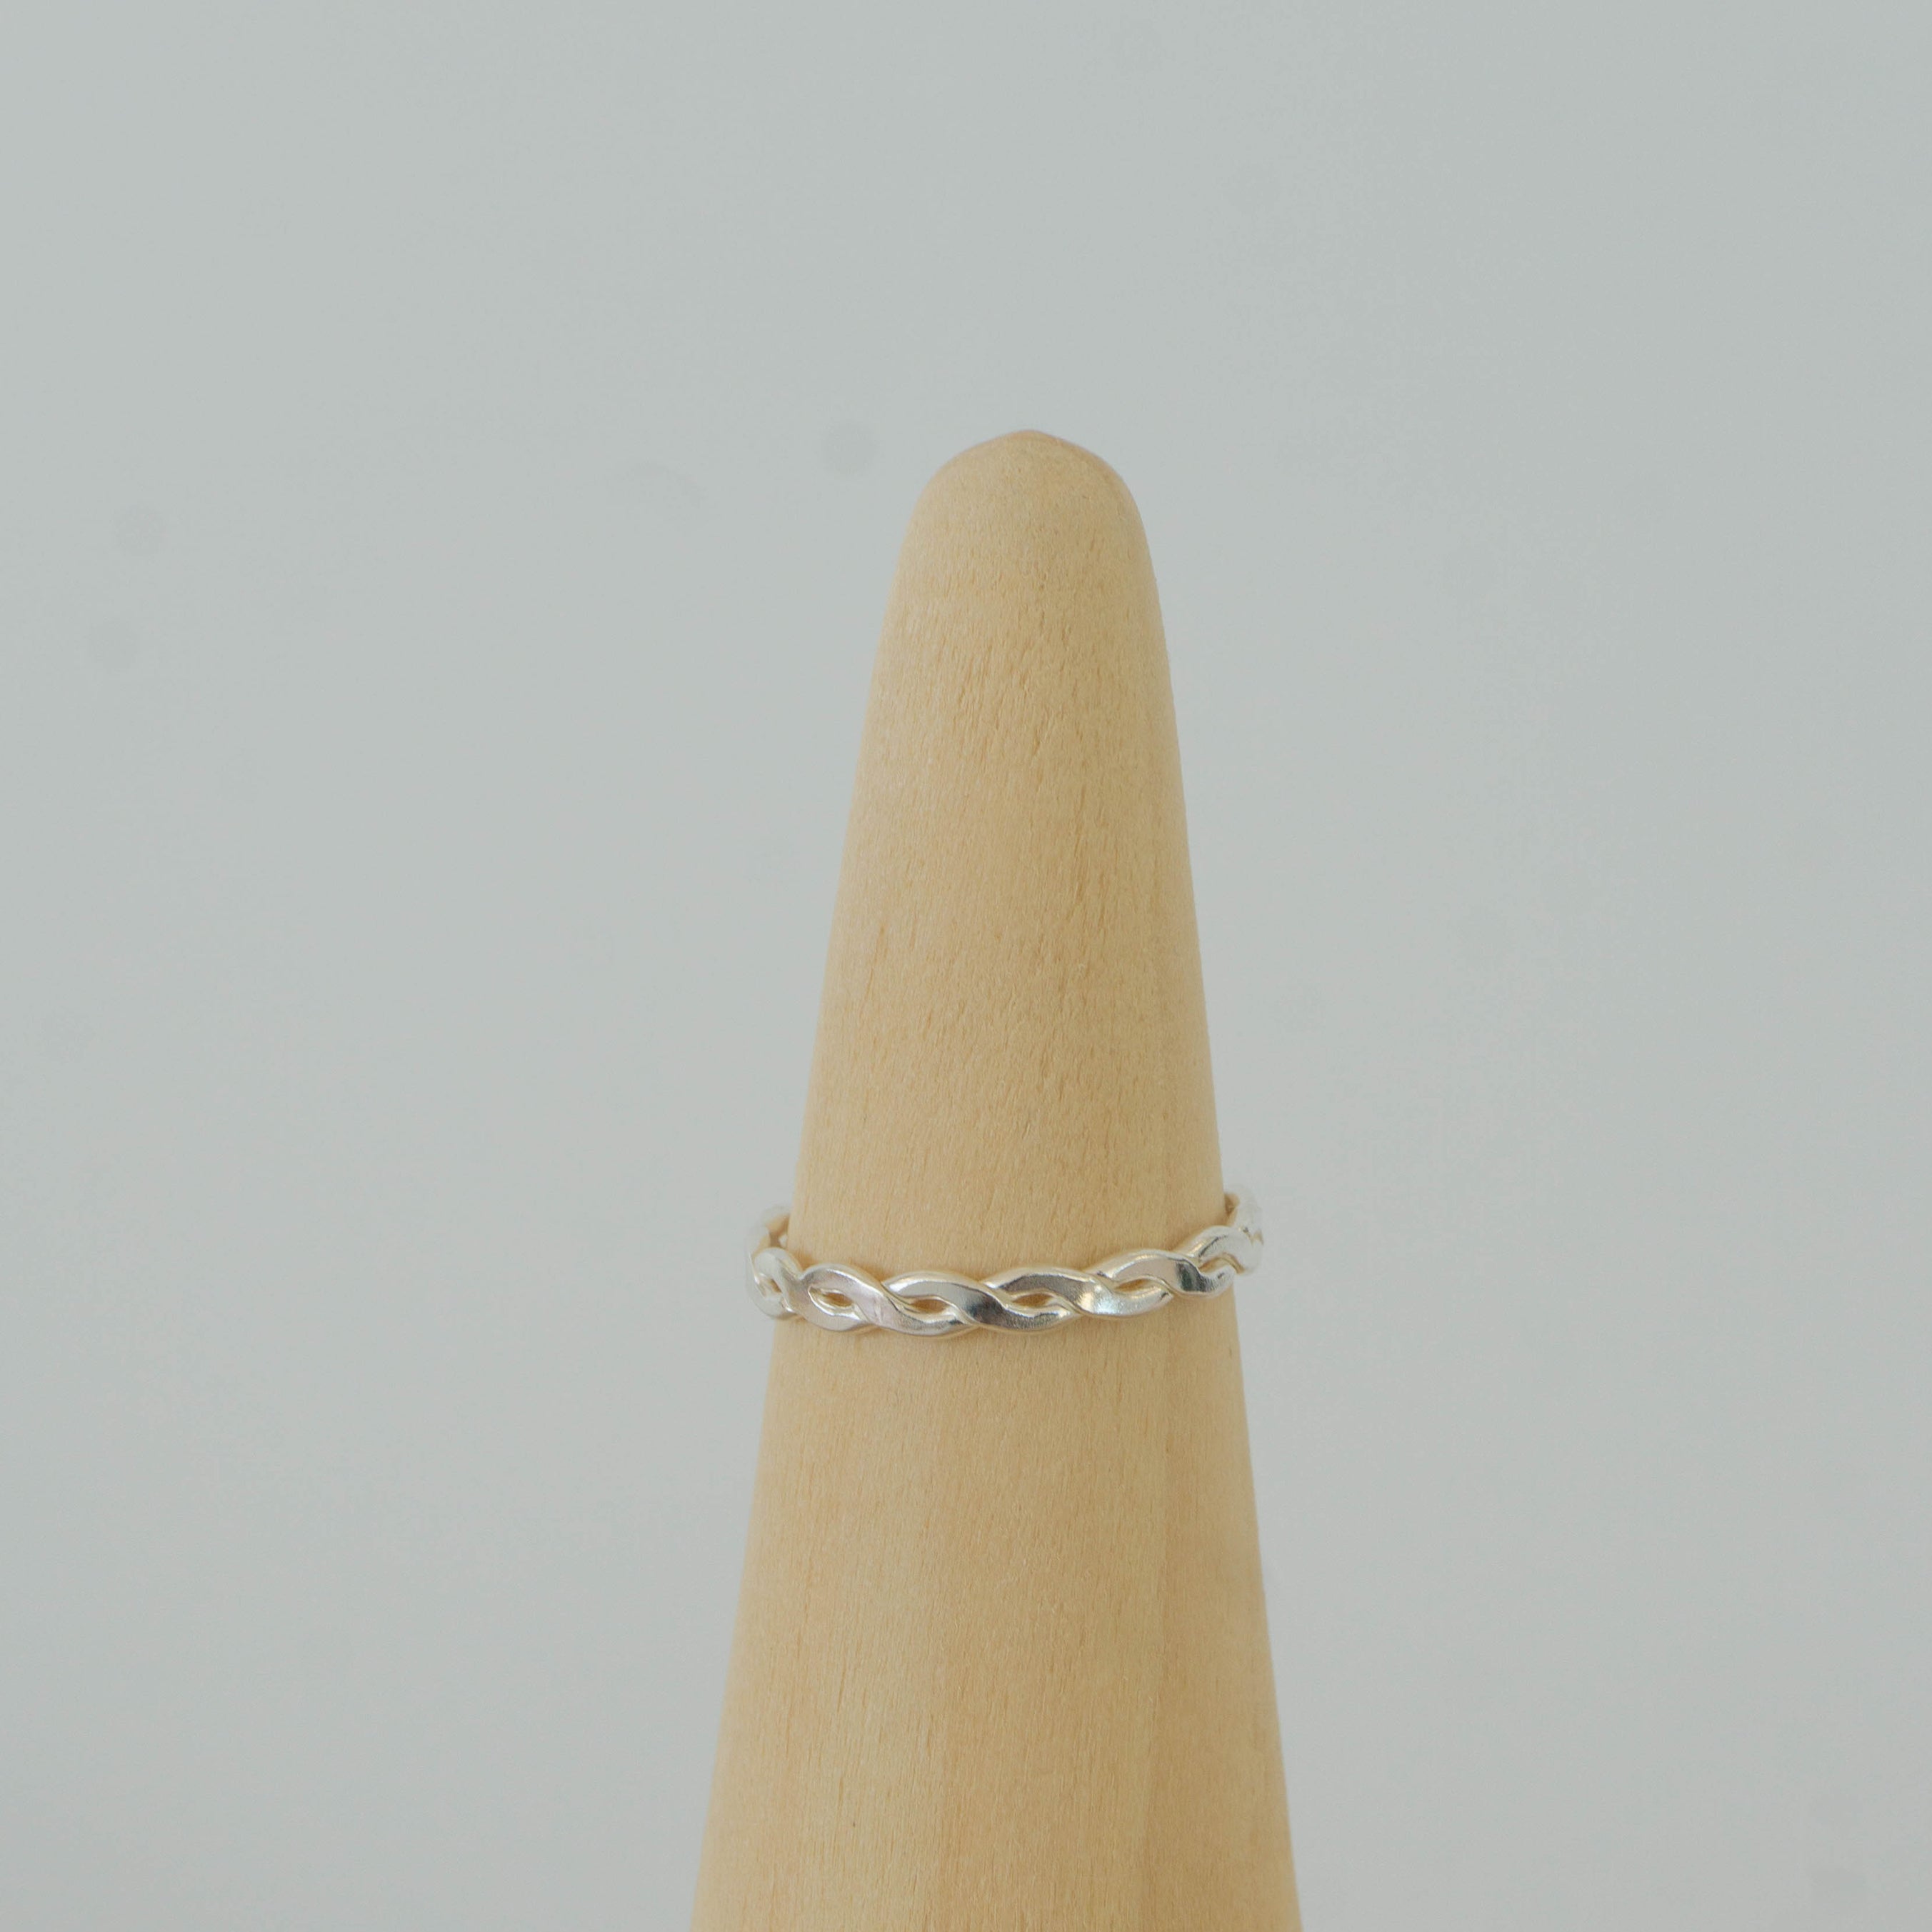 gold filled woven ring / sterling silver woven ring